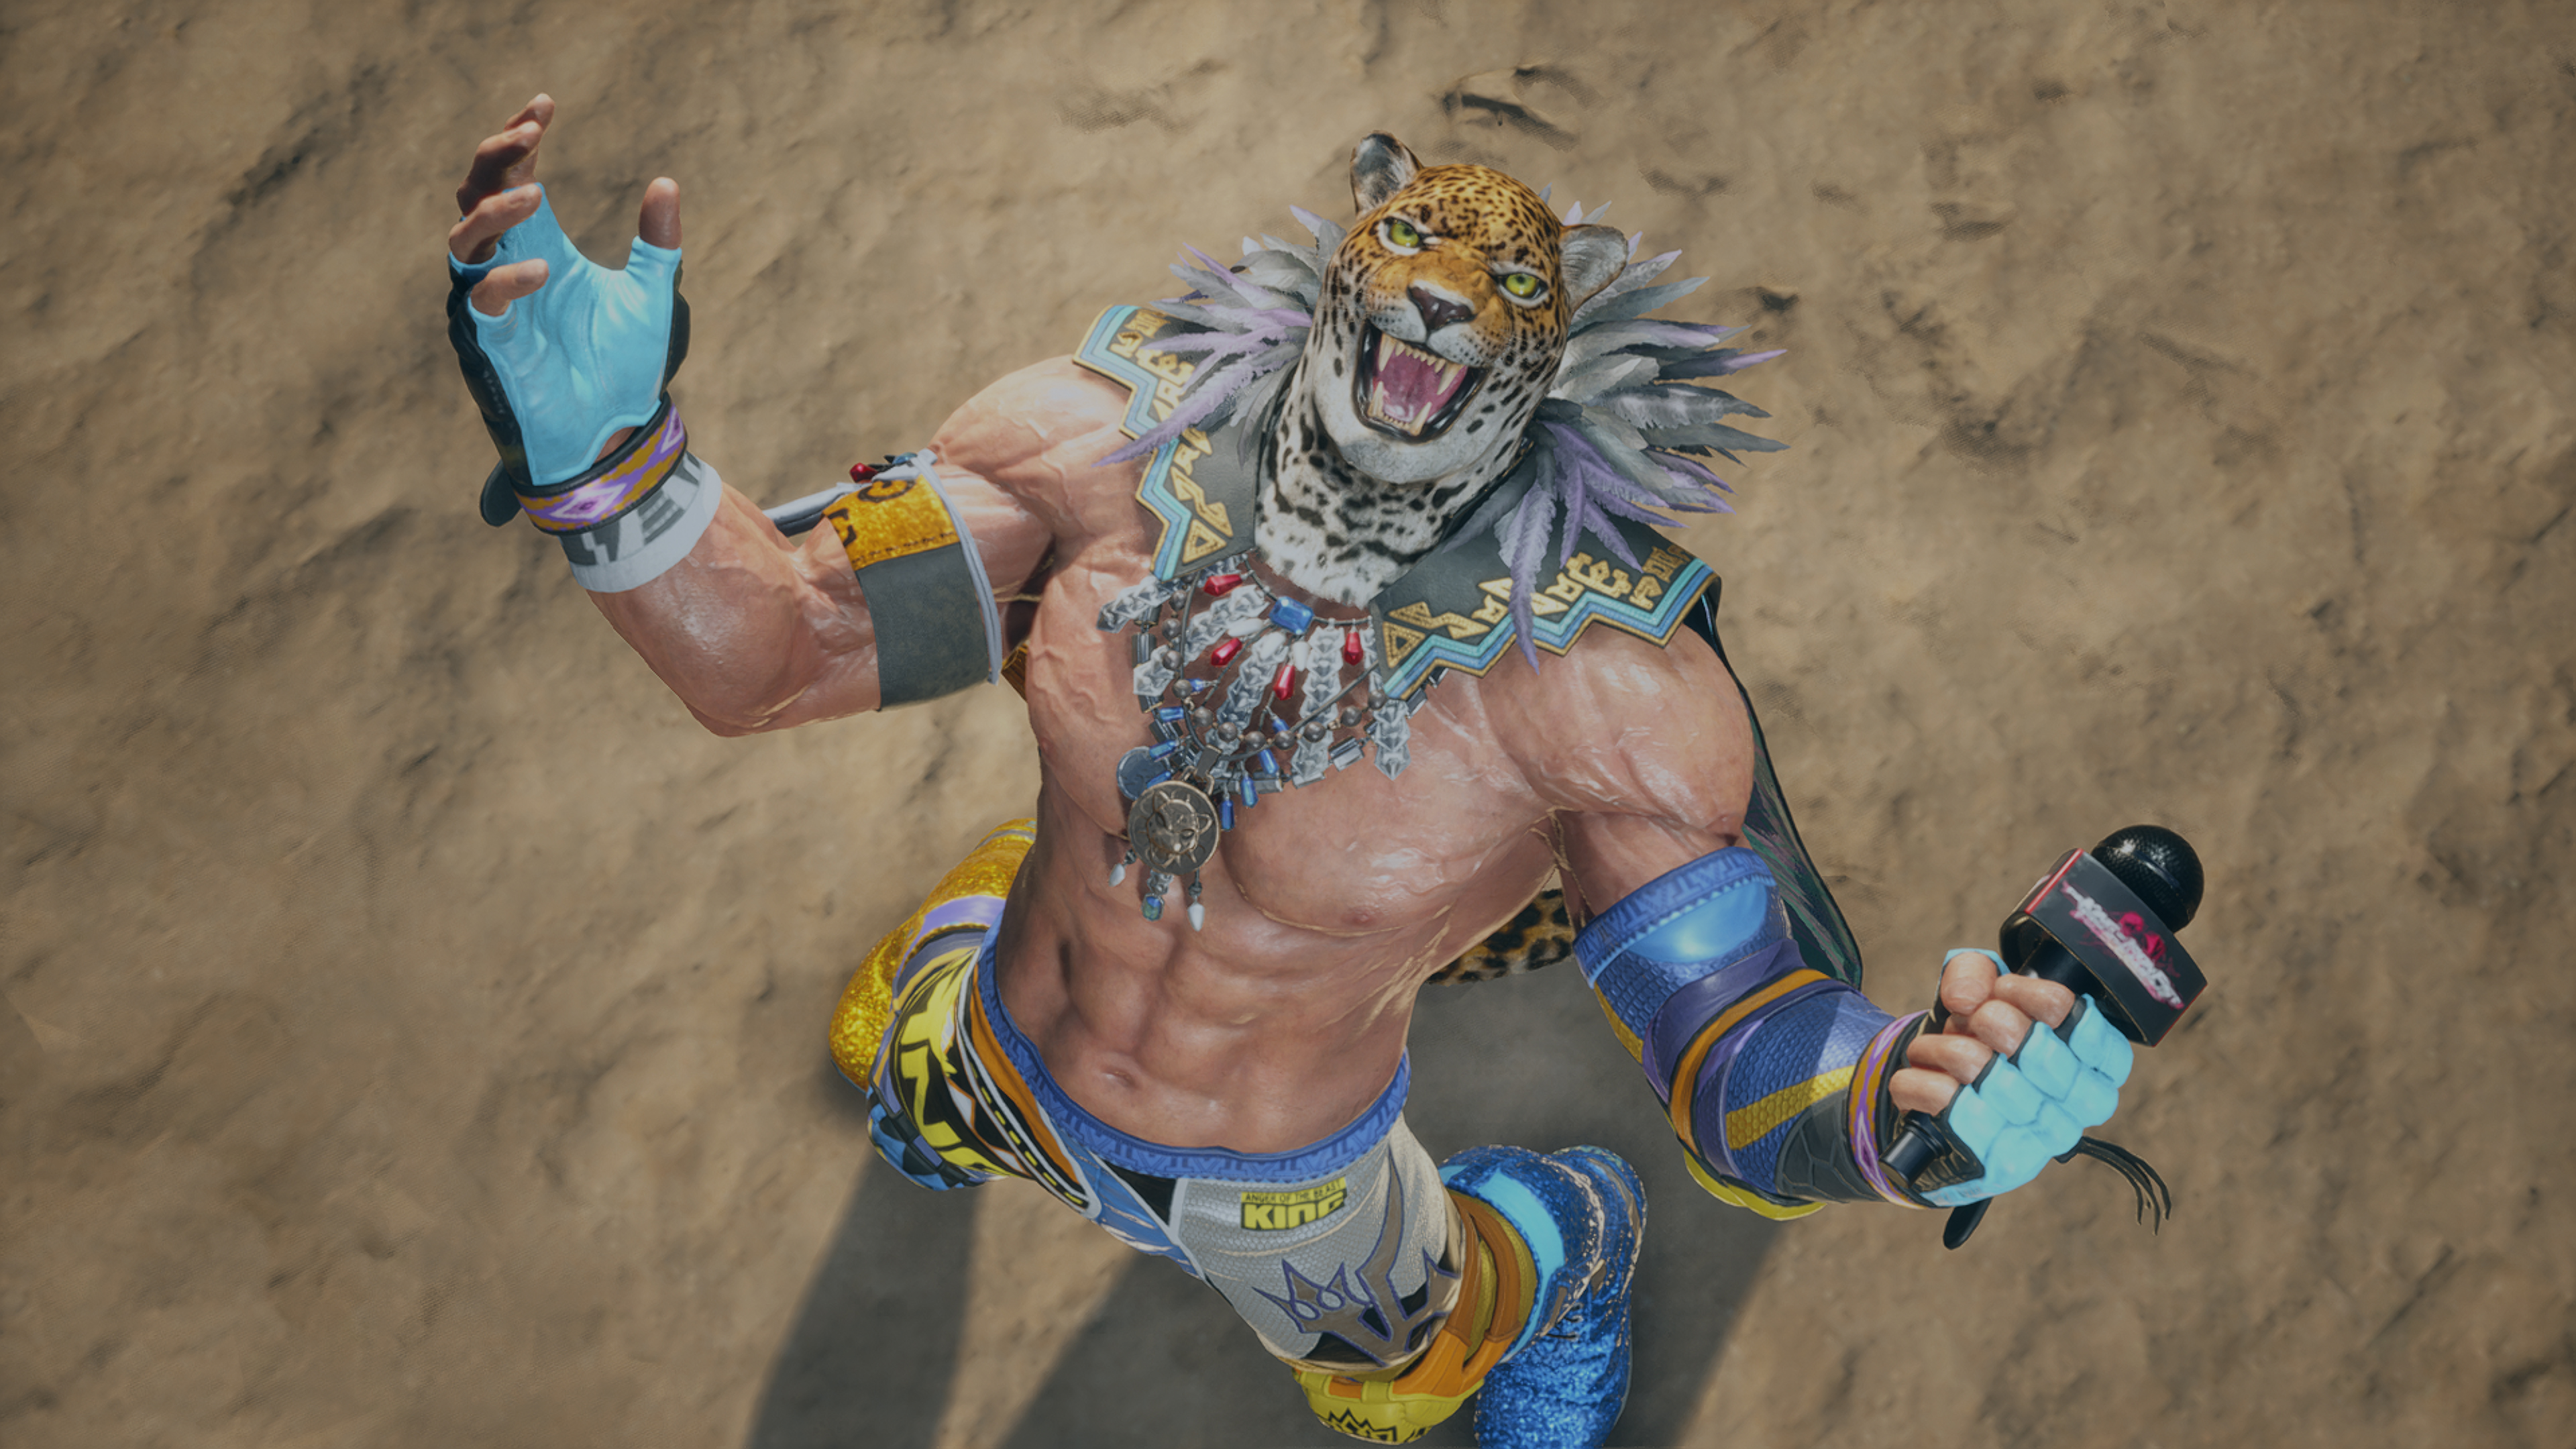 King performs a victory pose in Tekken 8.